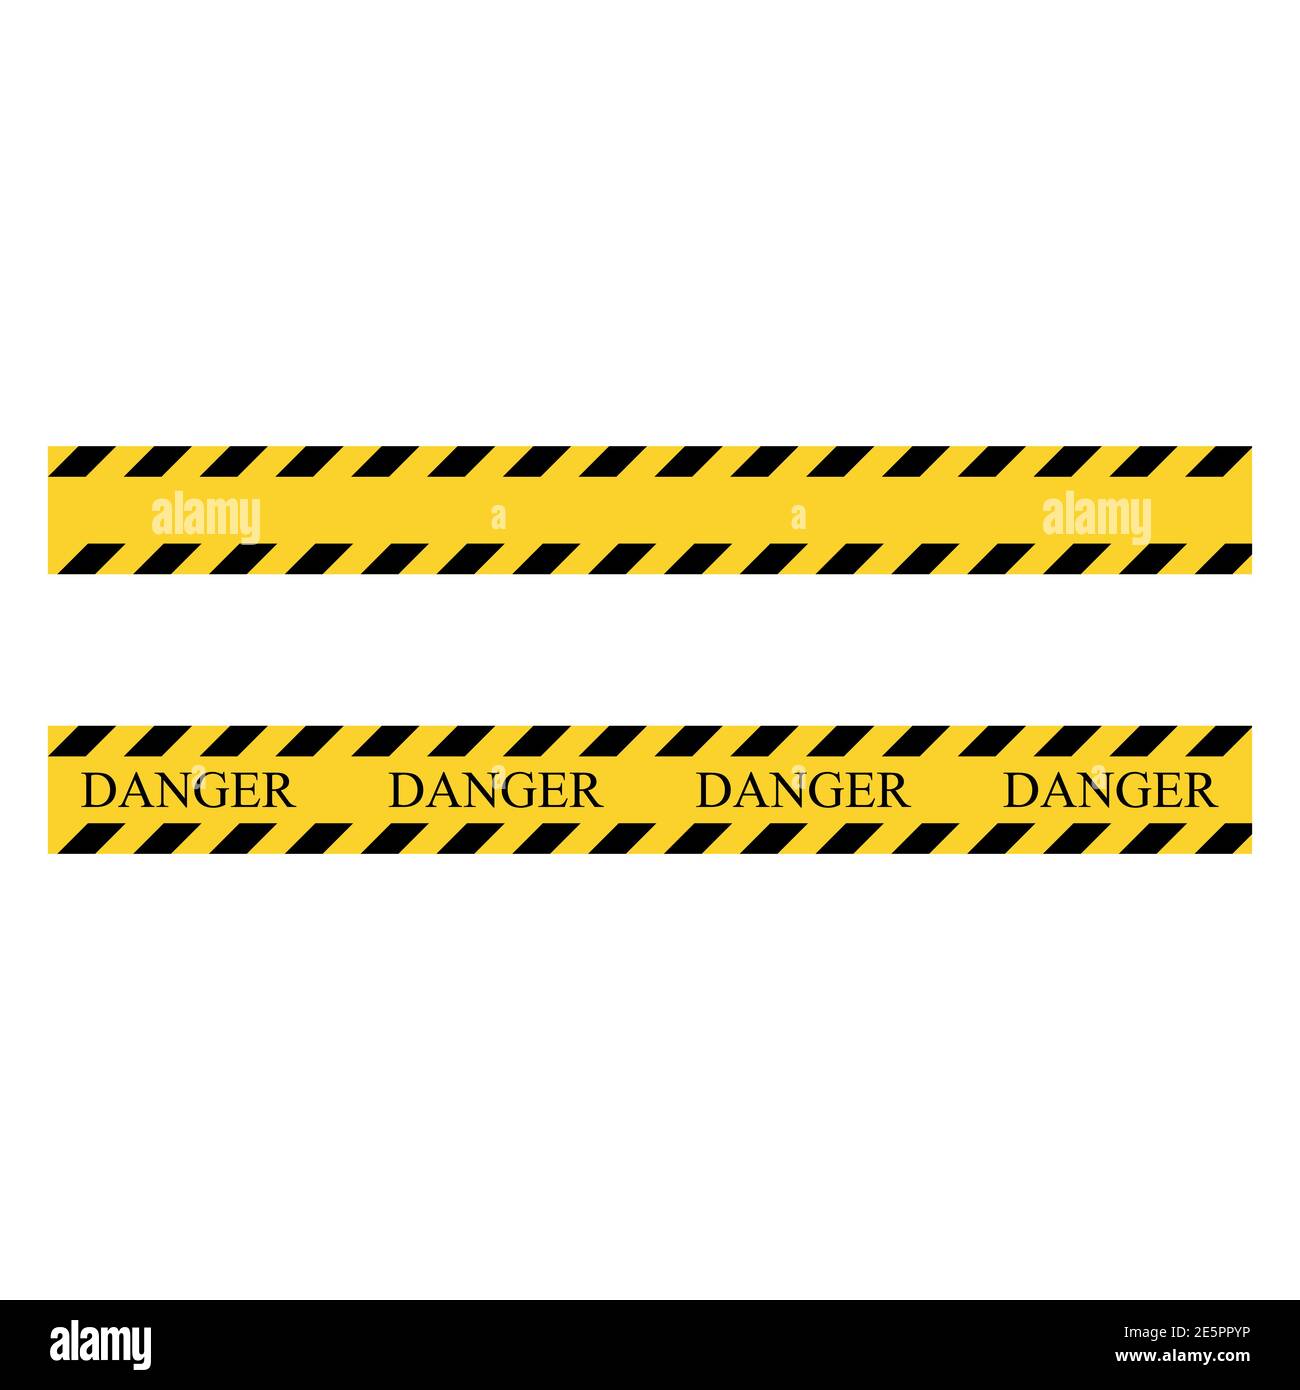 Danger stripe. Yellow and black set stripes. Barricade construction tape. Vector illustration isolated on white background Stock Vector